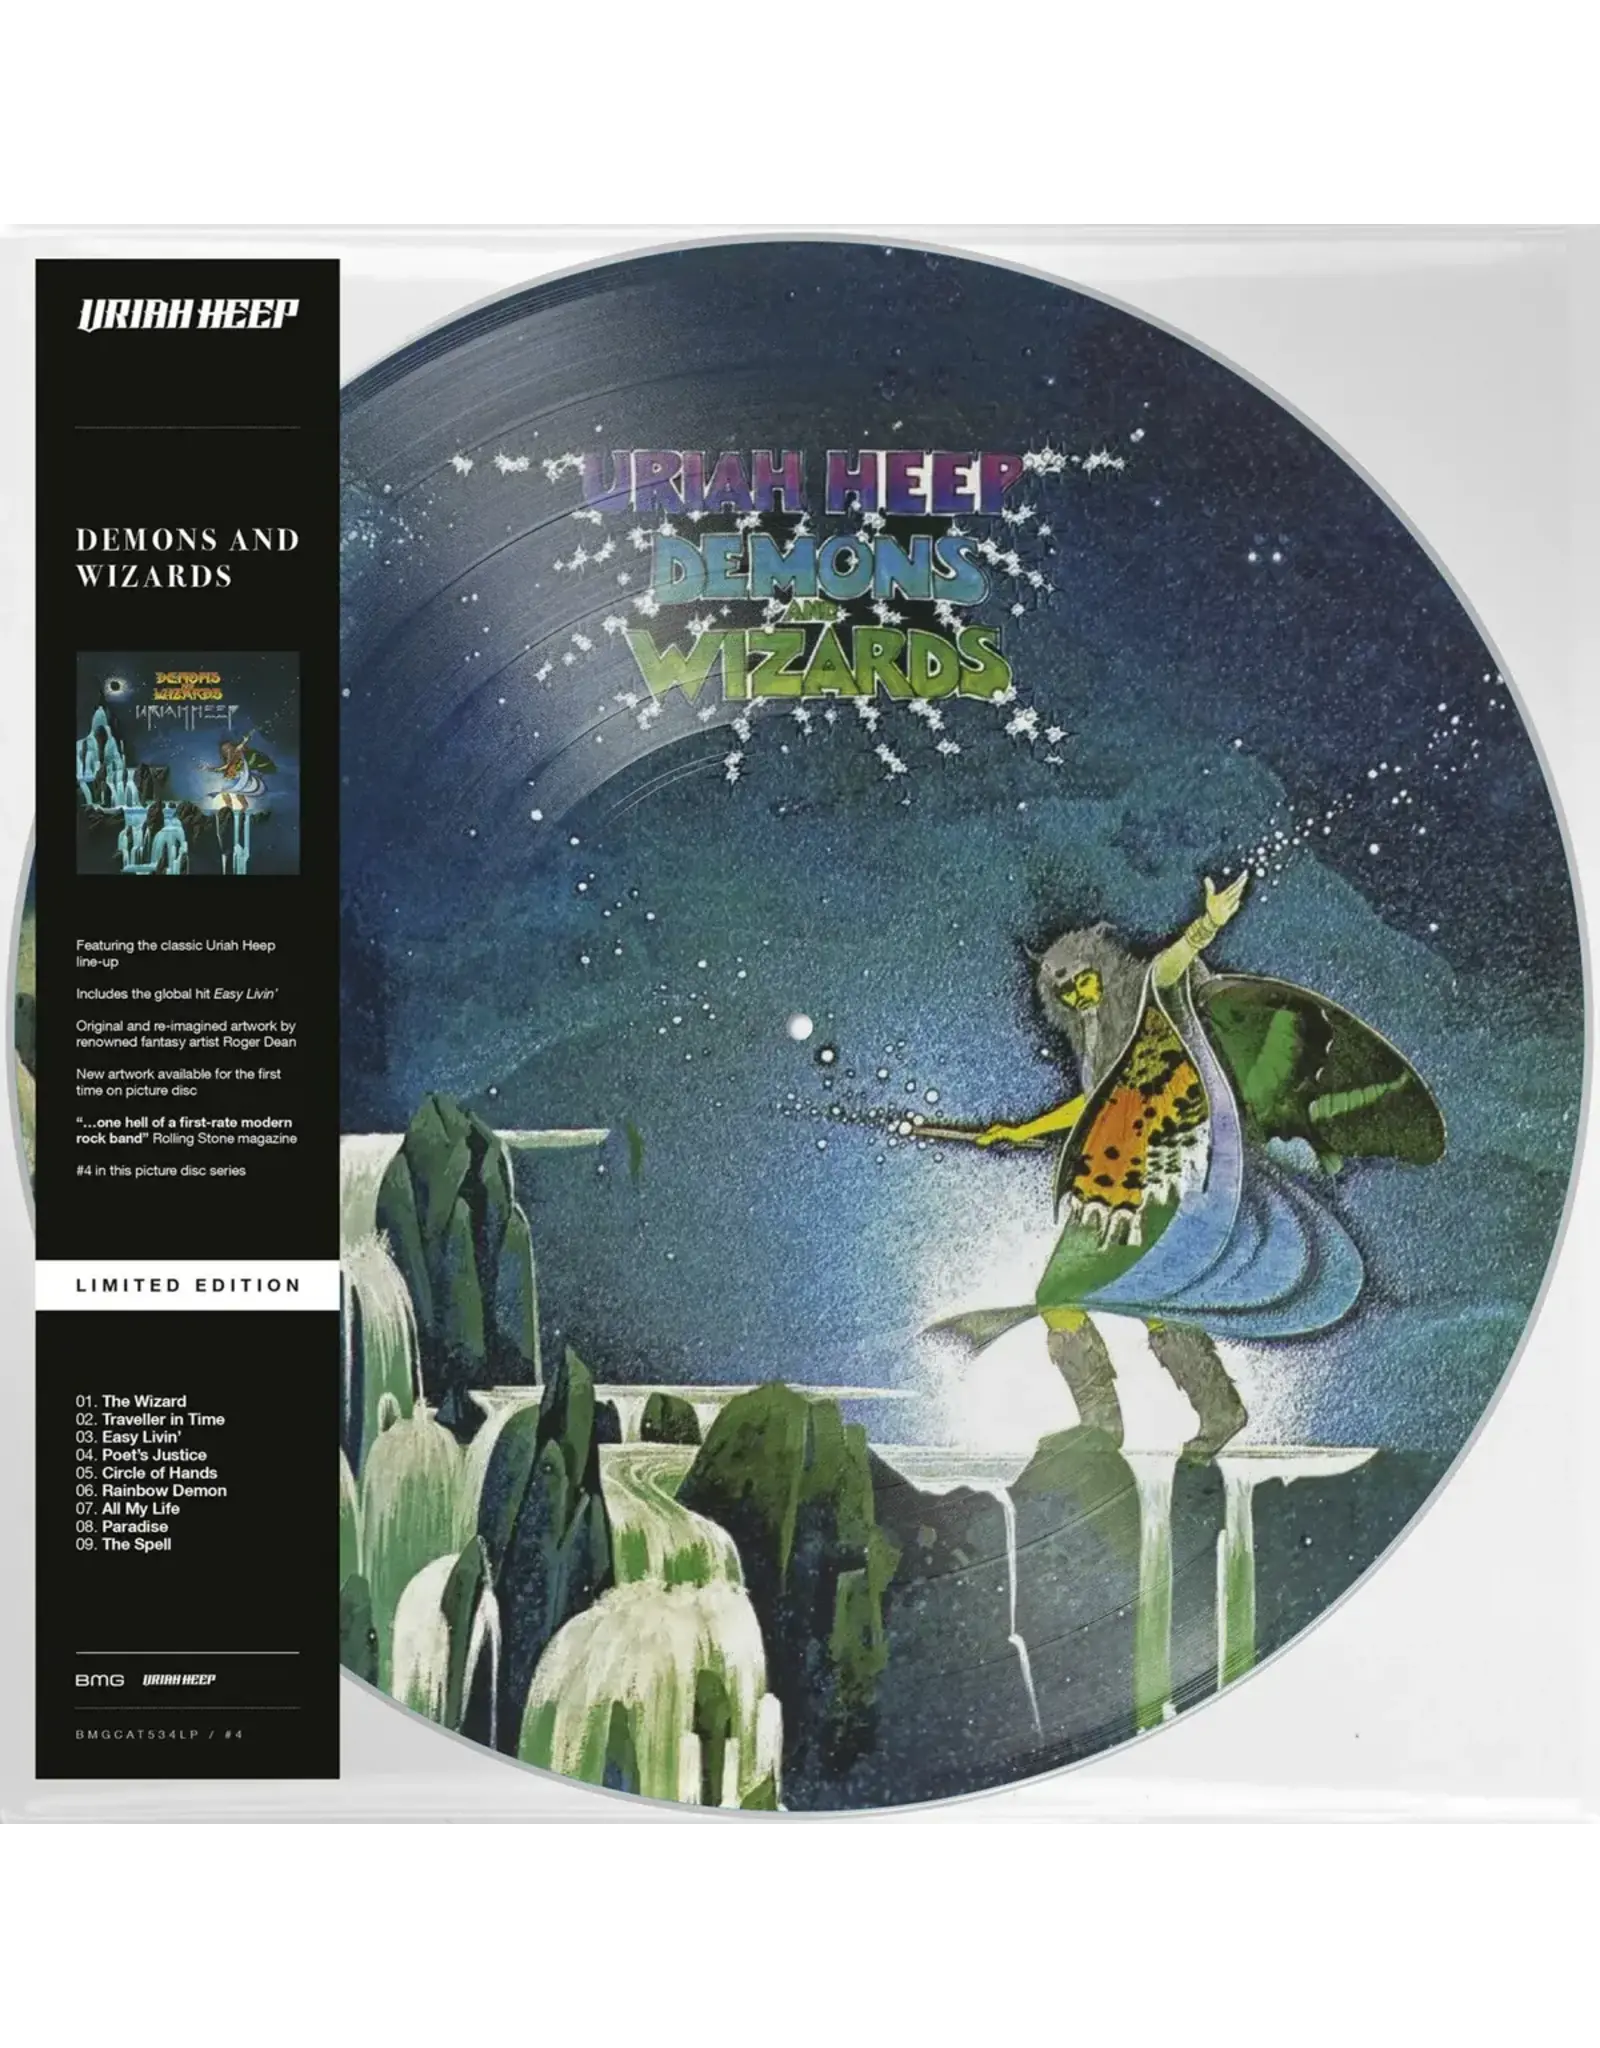 Uriah Heep - Demons and Wizards (Picture Disc)